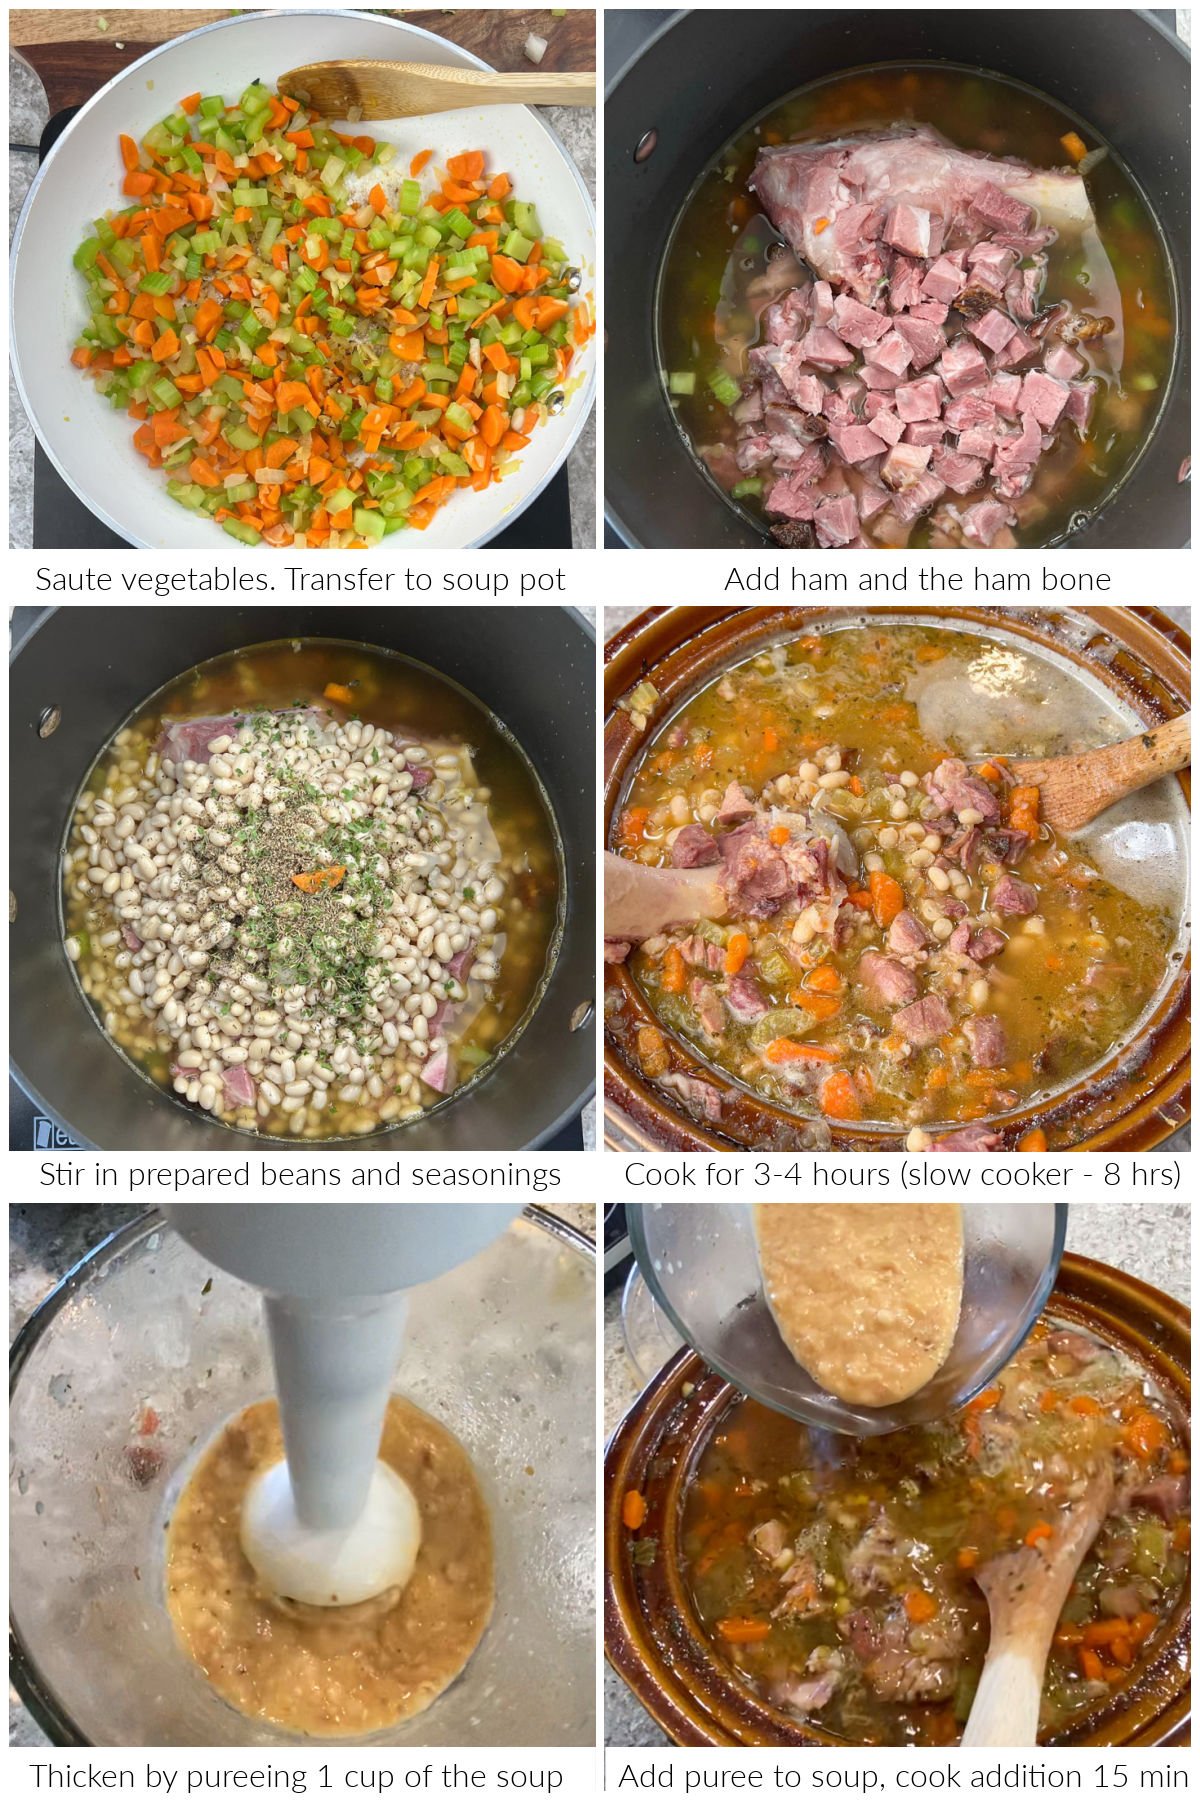 Step by step photos to prepare ham and bean soup.